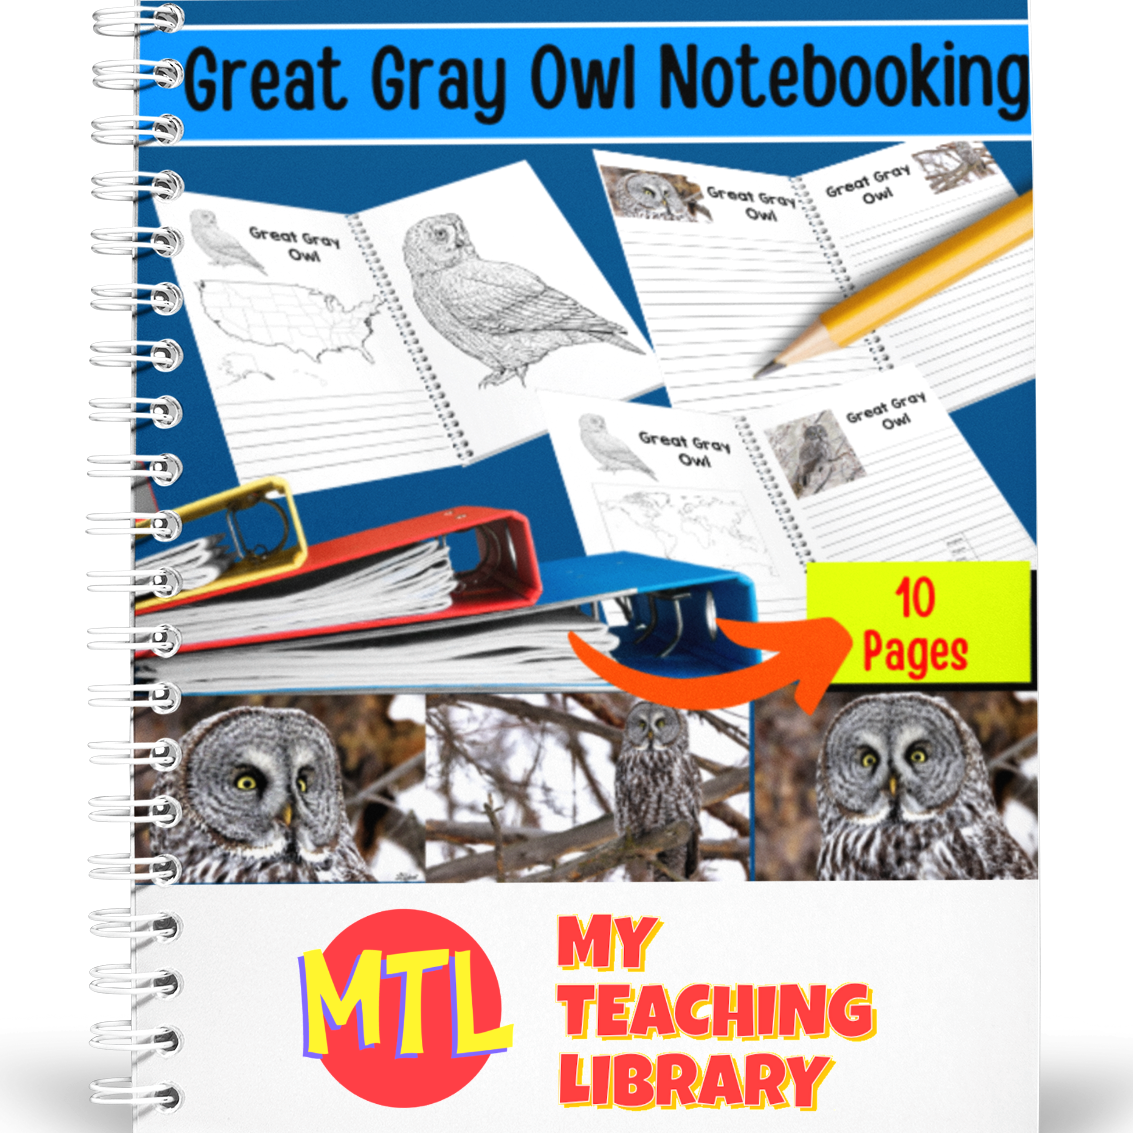 z 367 Great Gray Owl Notebooking cover